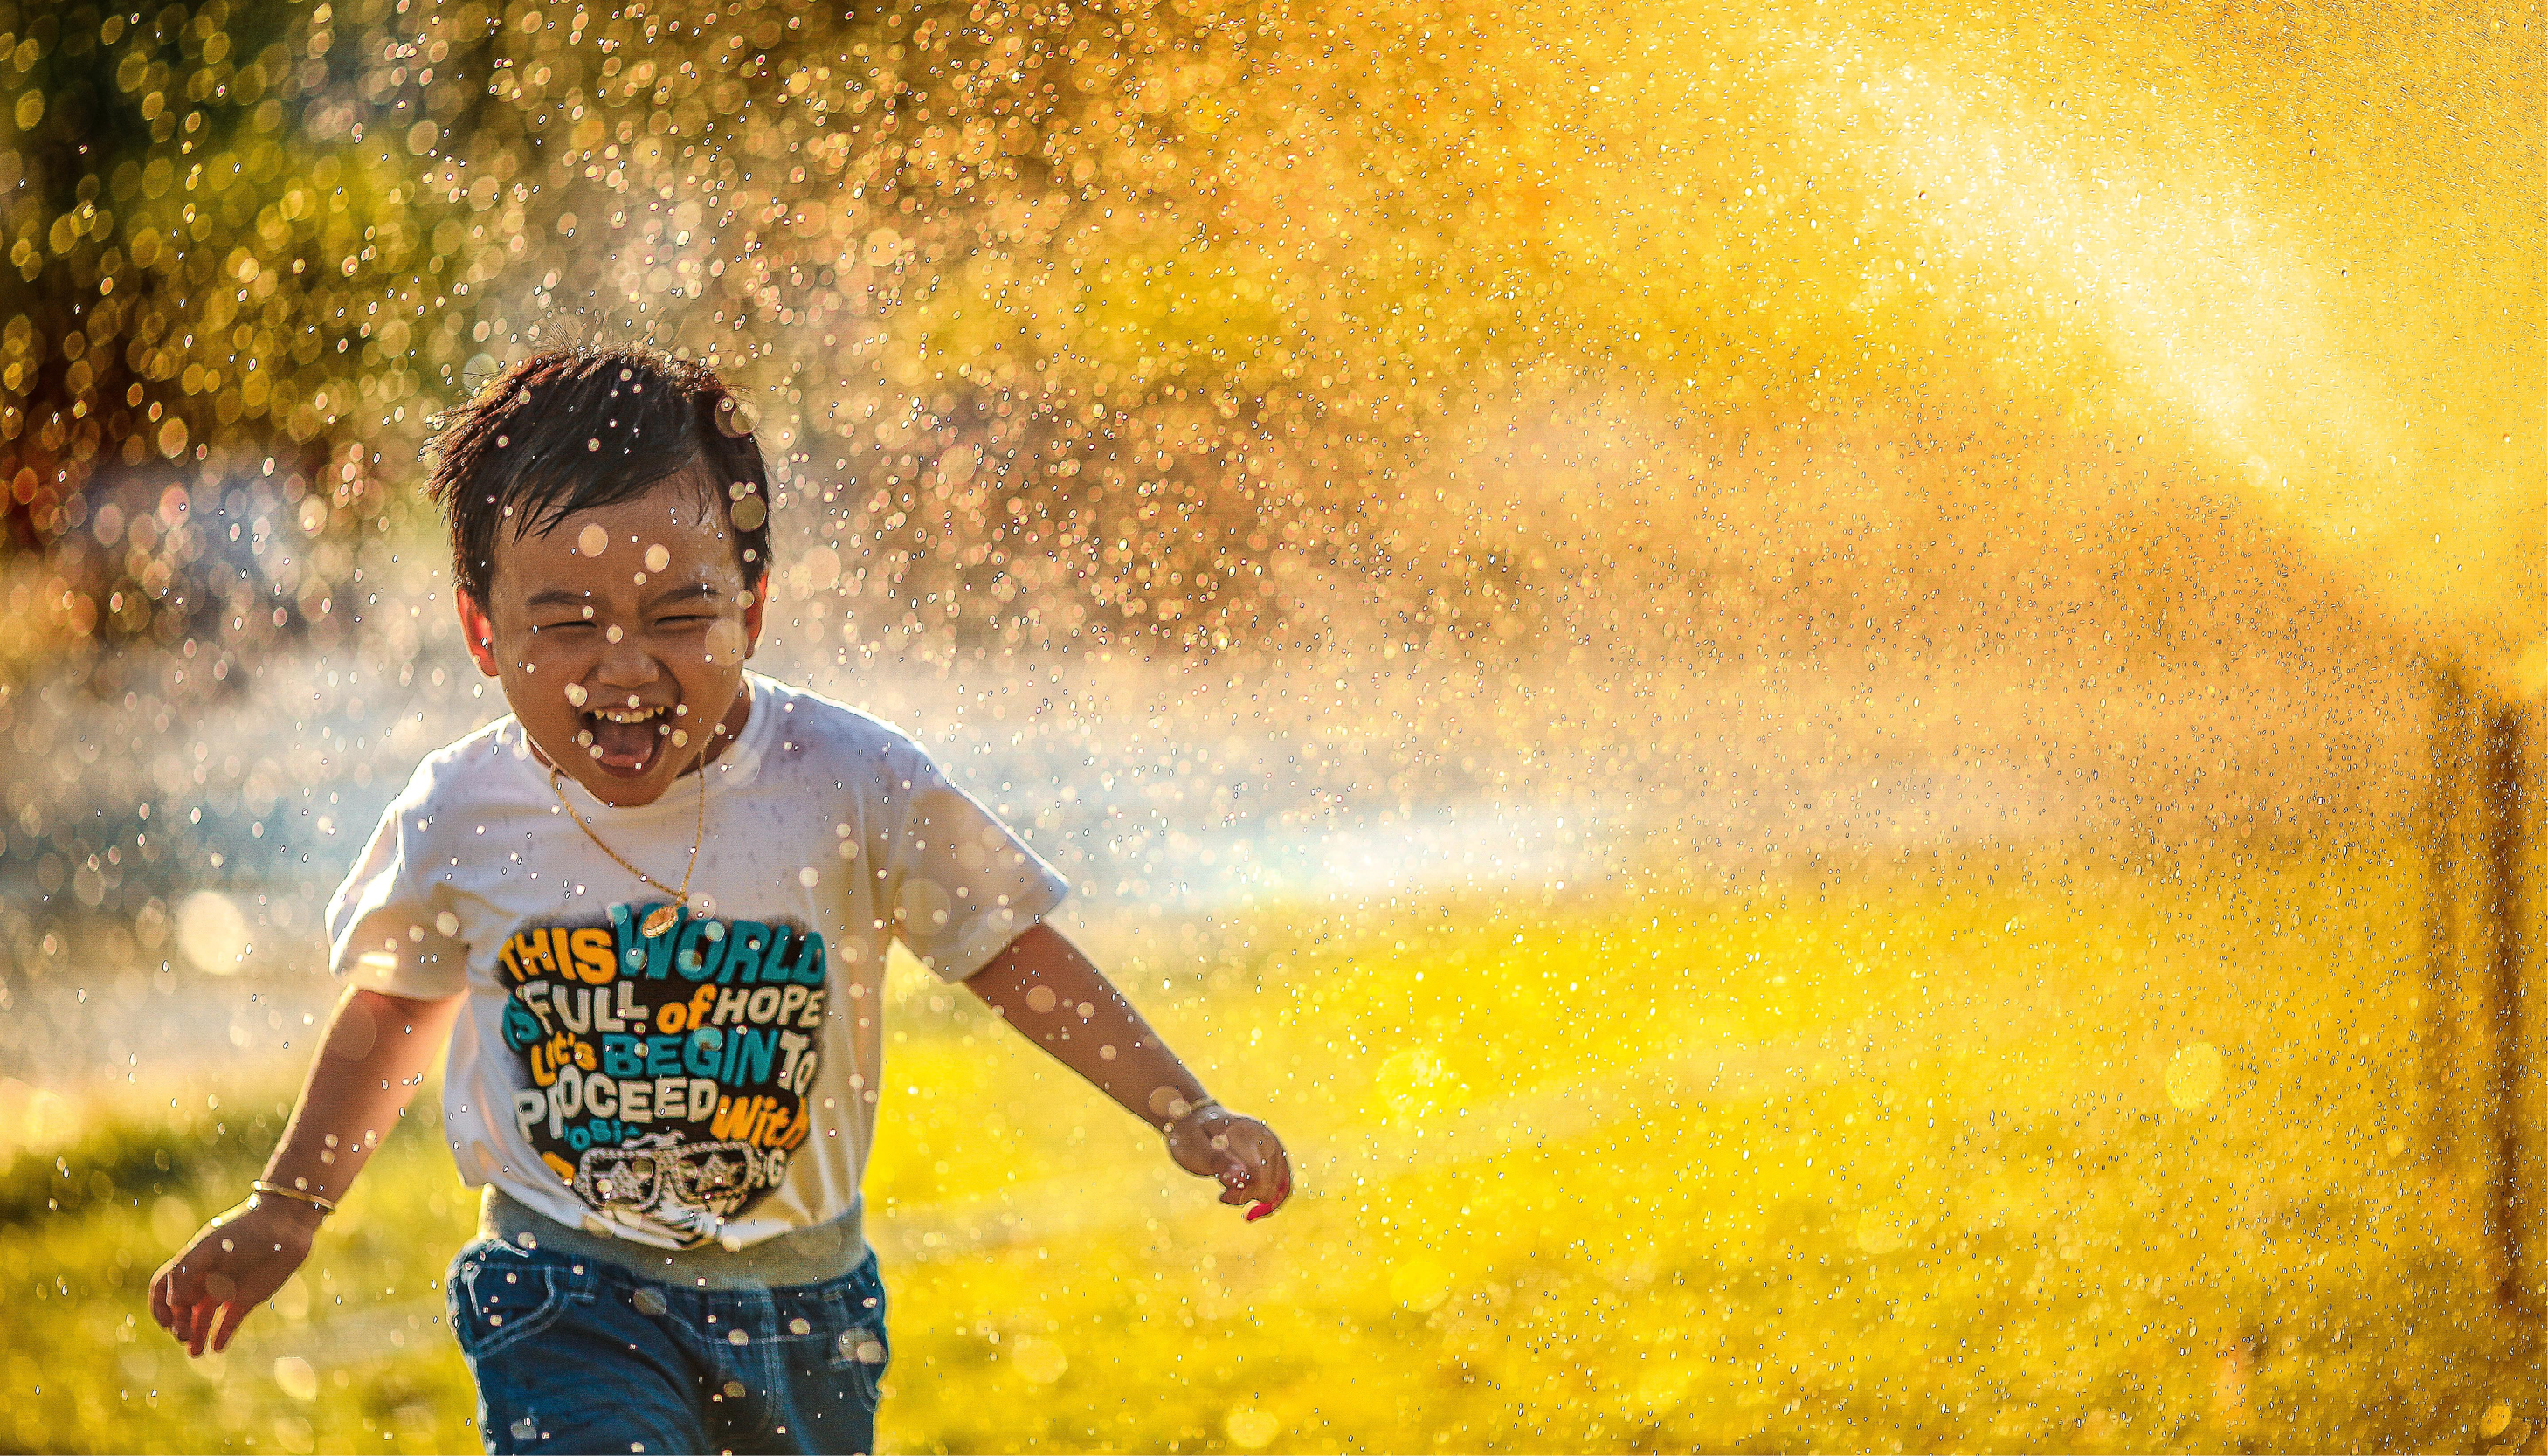 Child playing in the sprinkler outside